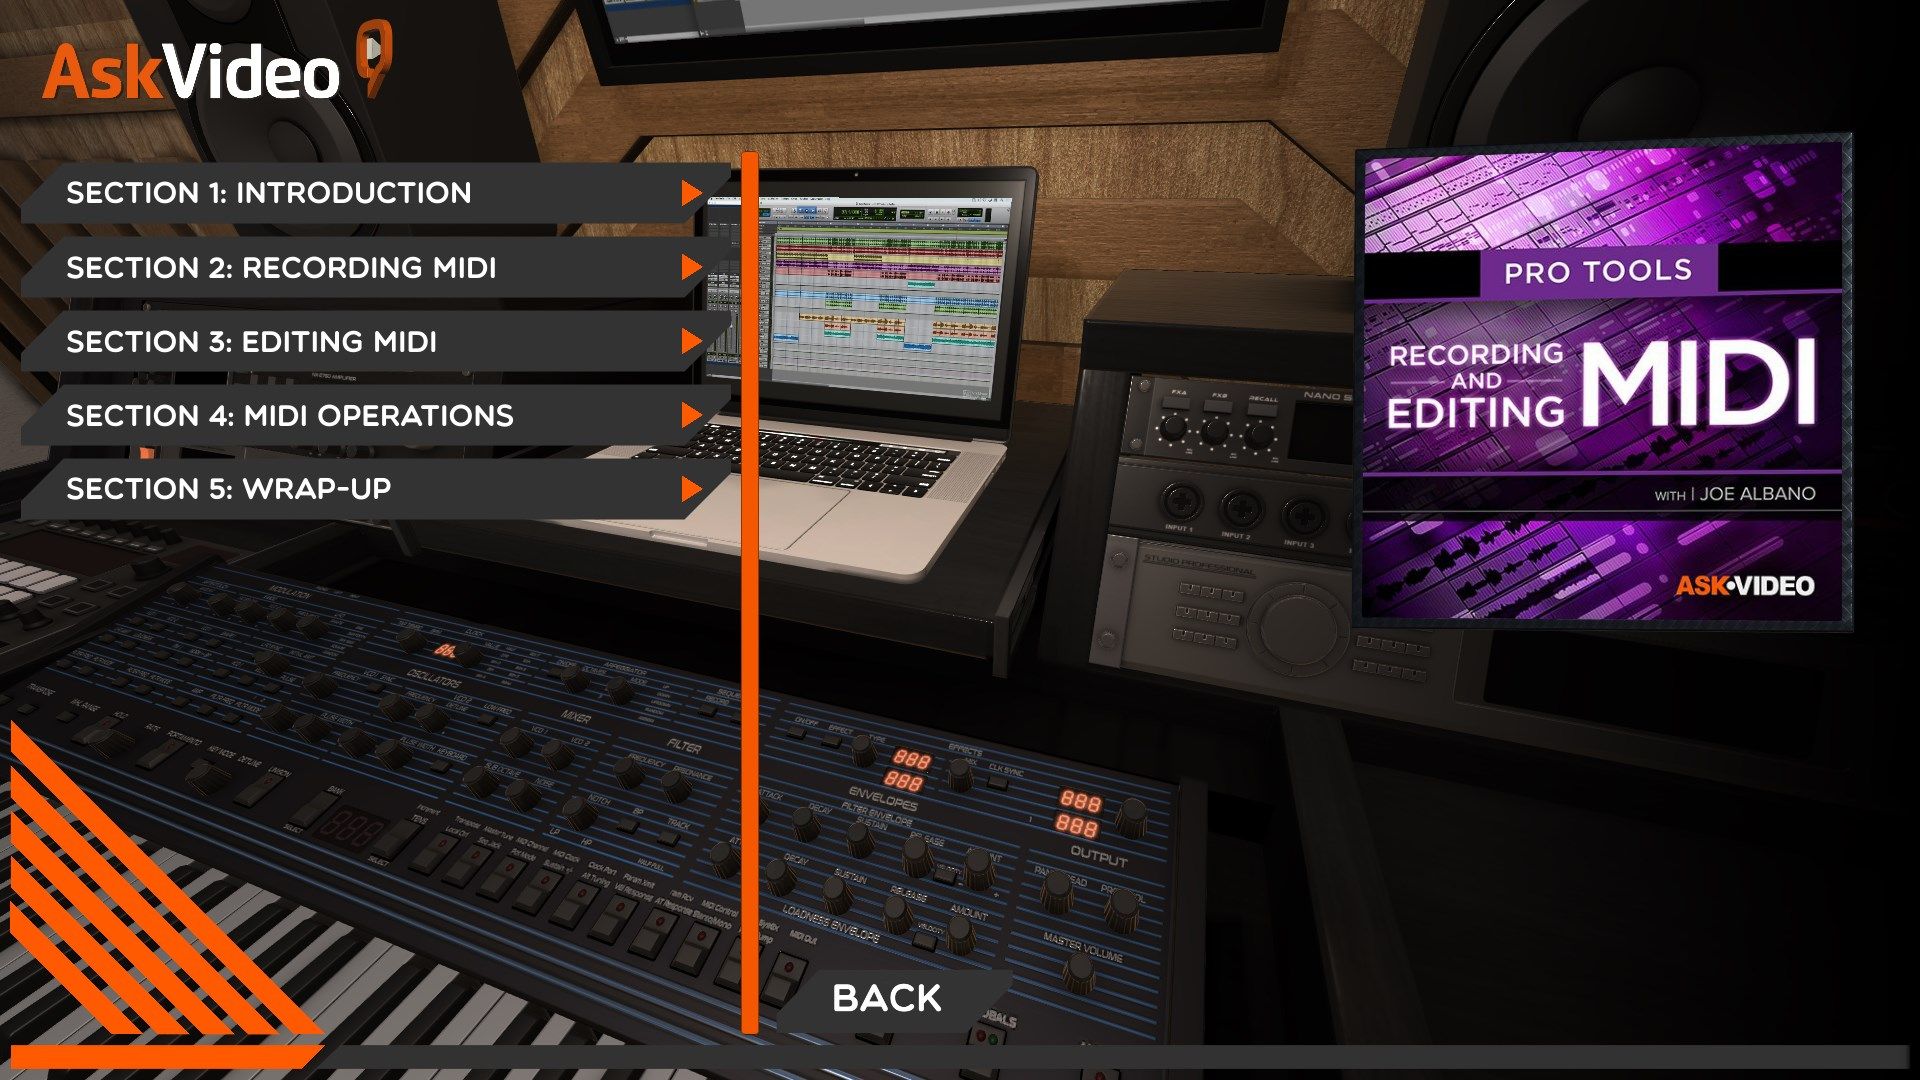 Recording and Editing MIDI Course For Pro Tools